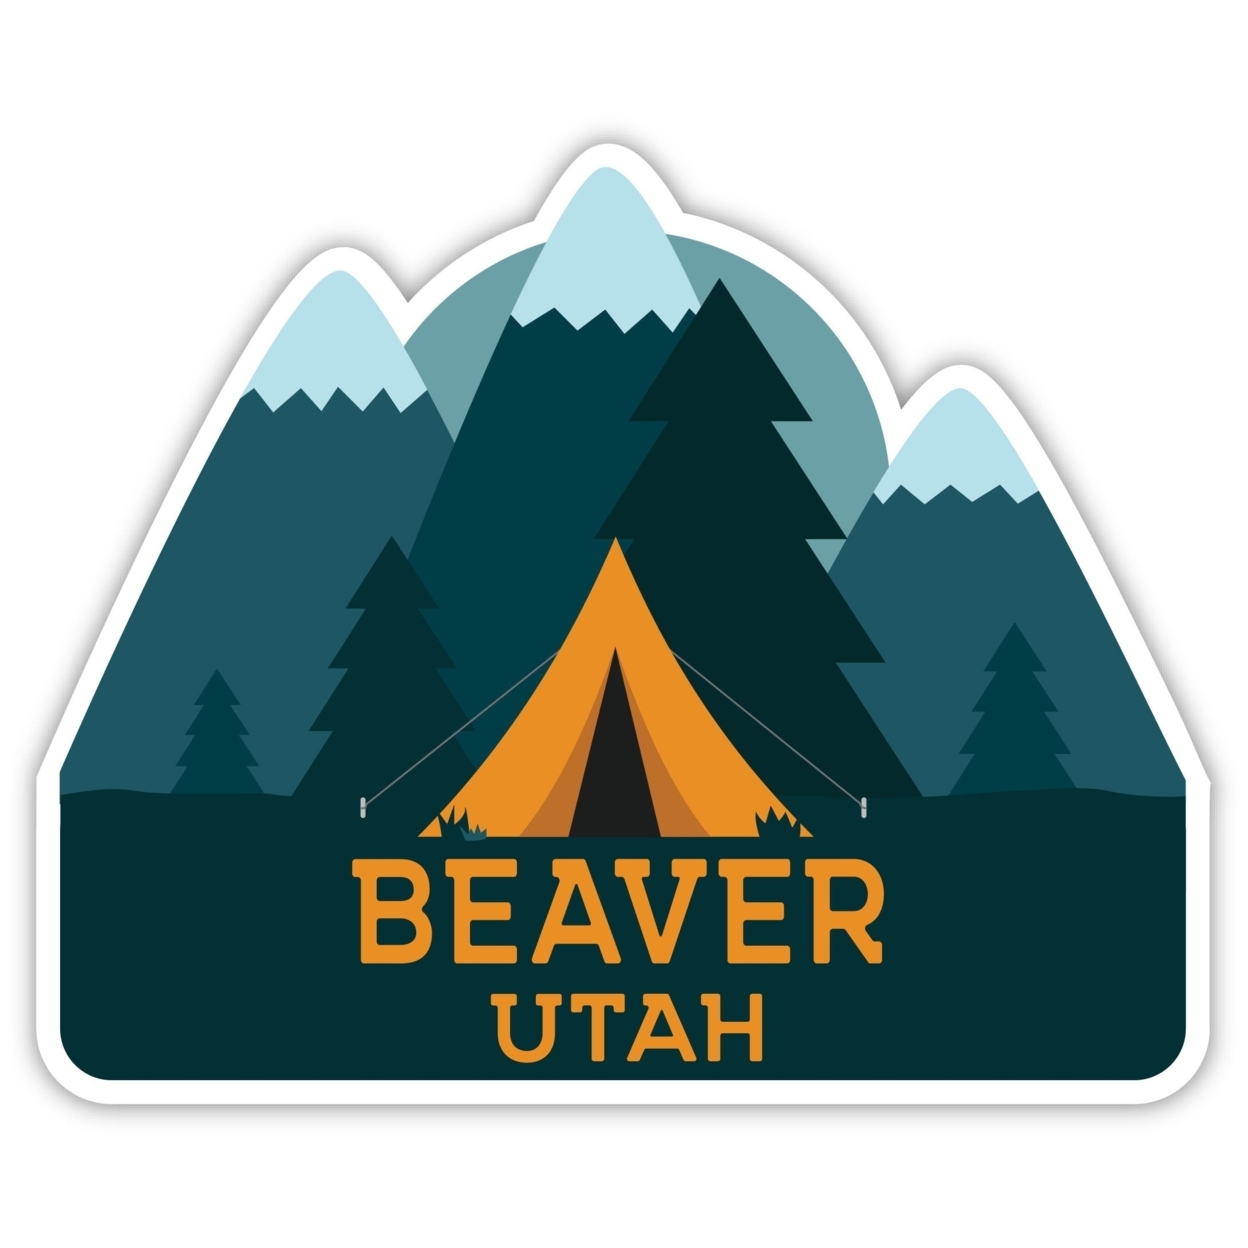 Beaver Utah Souvenir Decorative Stickers (Choose Theme And Size) - 4-Pack, 2-Inch, Tent